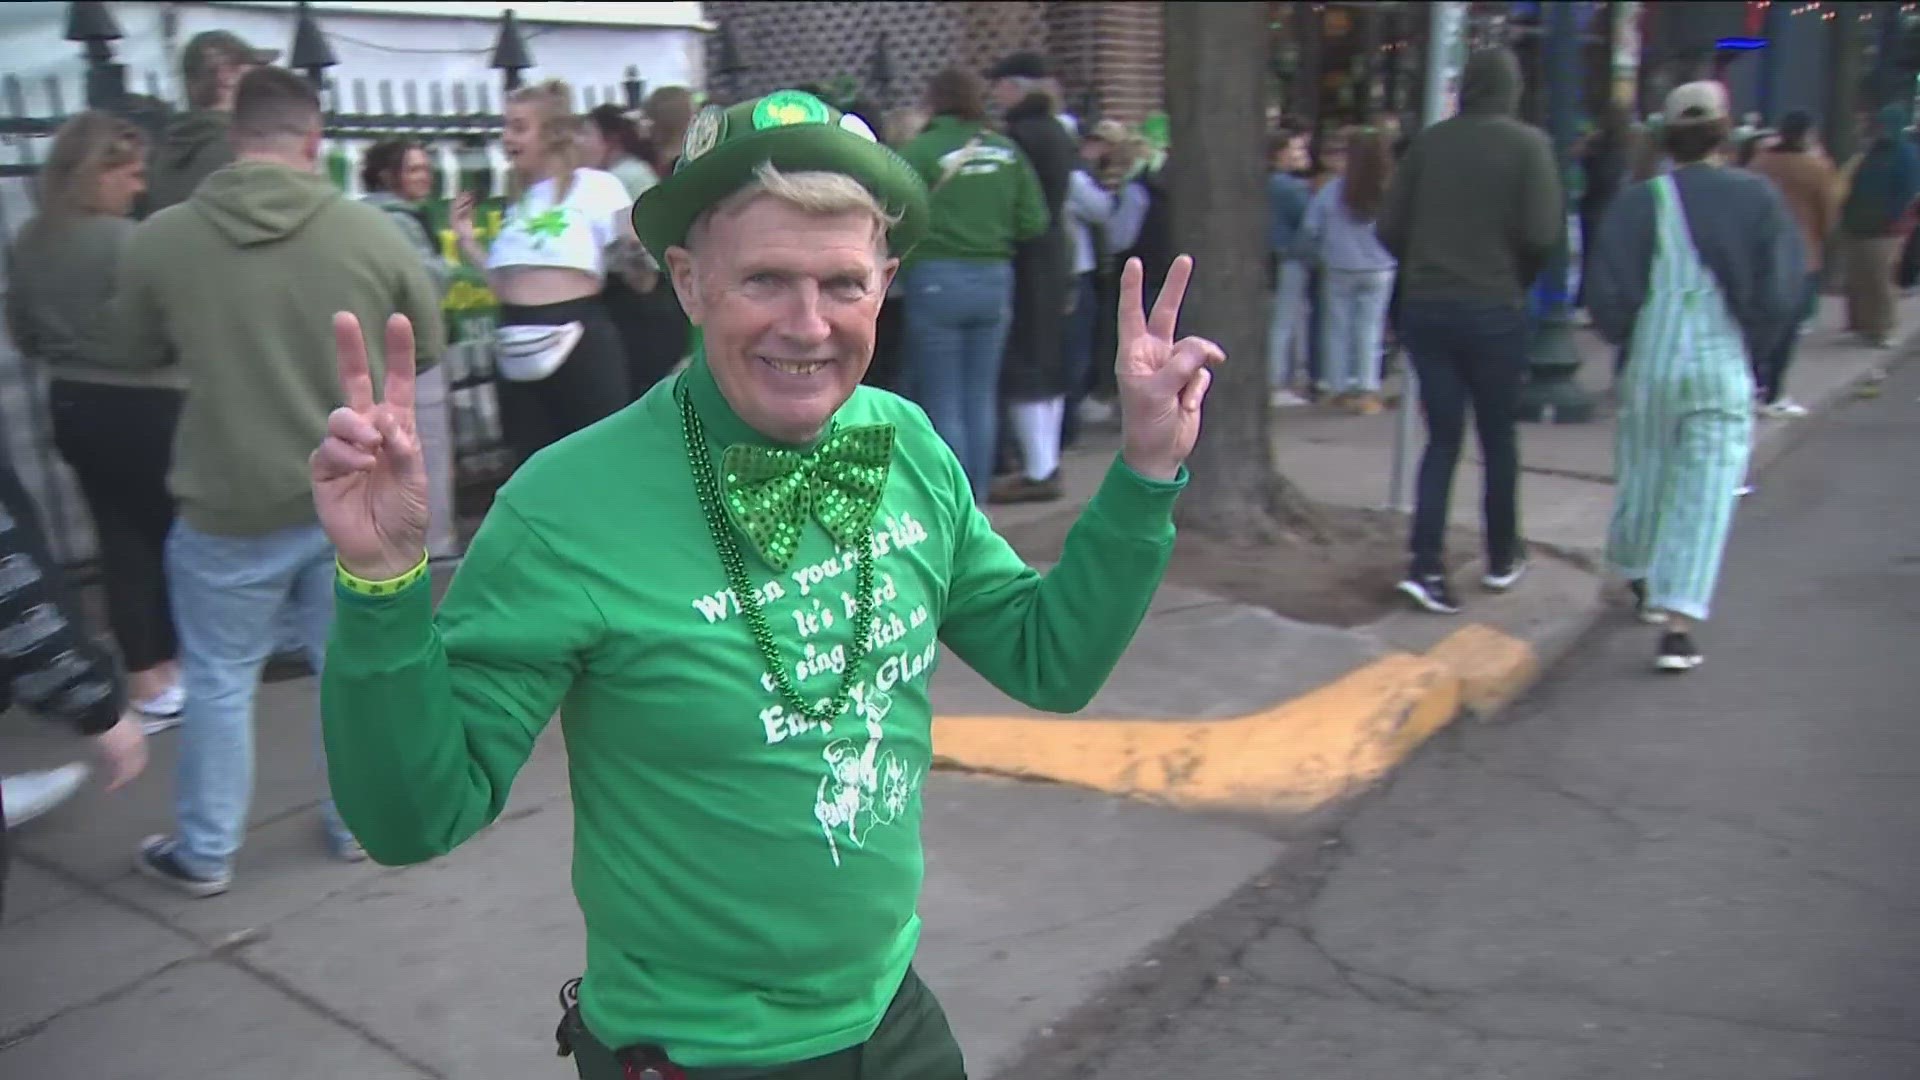 "To have St. Patrick's Day around here at the same time, you couldn't ask for anything better than that," Sipel said.